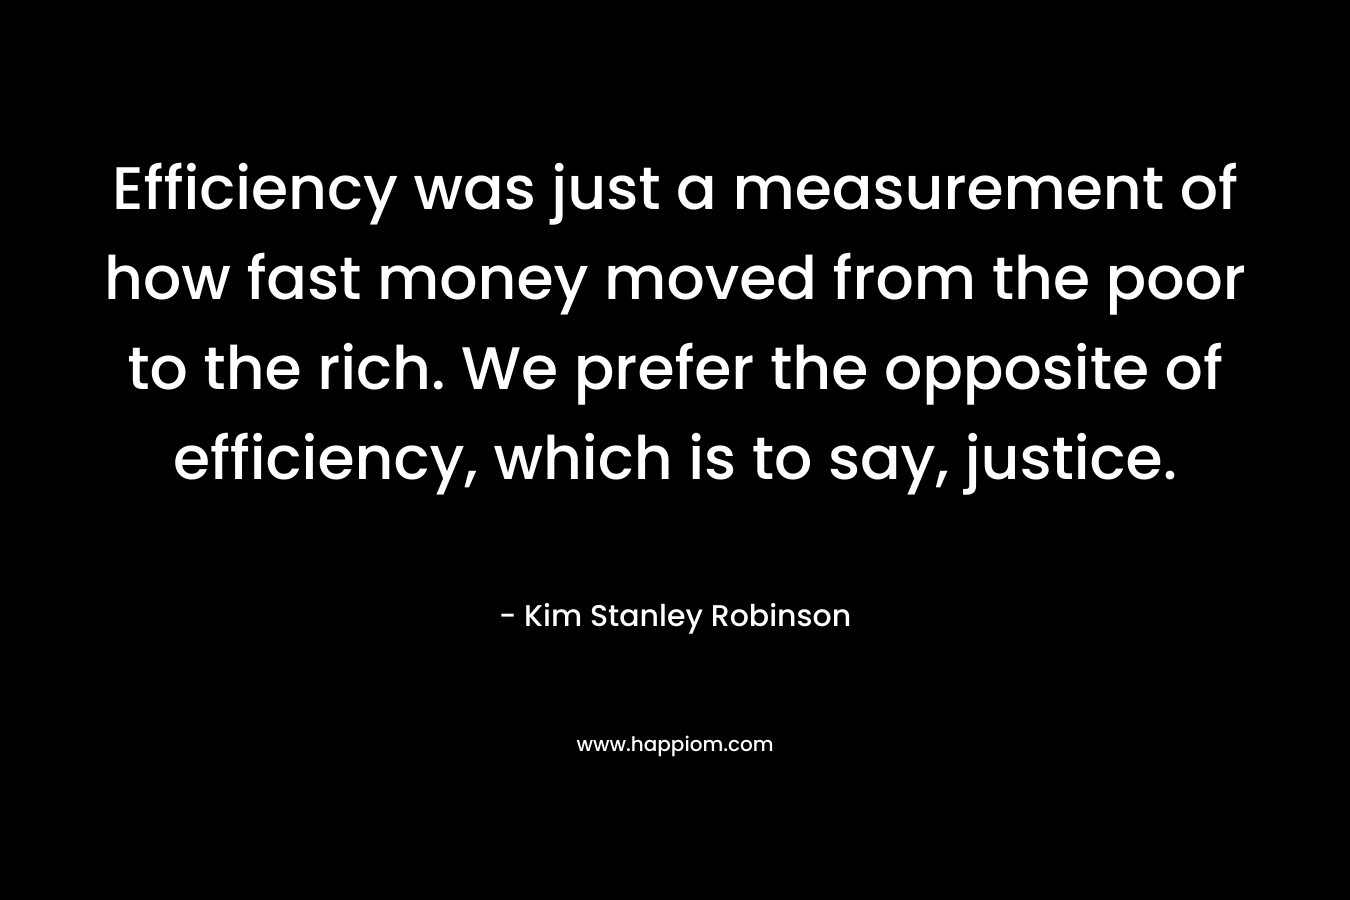 Efficiency was just a measurement of how fast money moved from the poor to the rich. We prefer the opposite of efficiency, which is to say, justice. – Kim Stanley Robinson